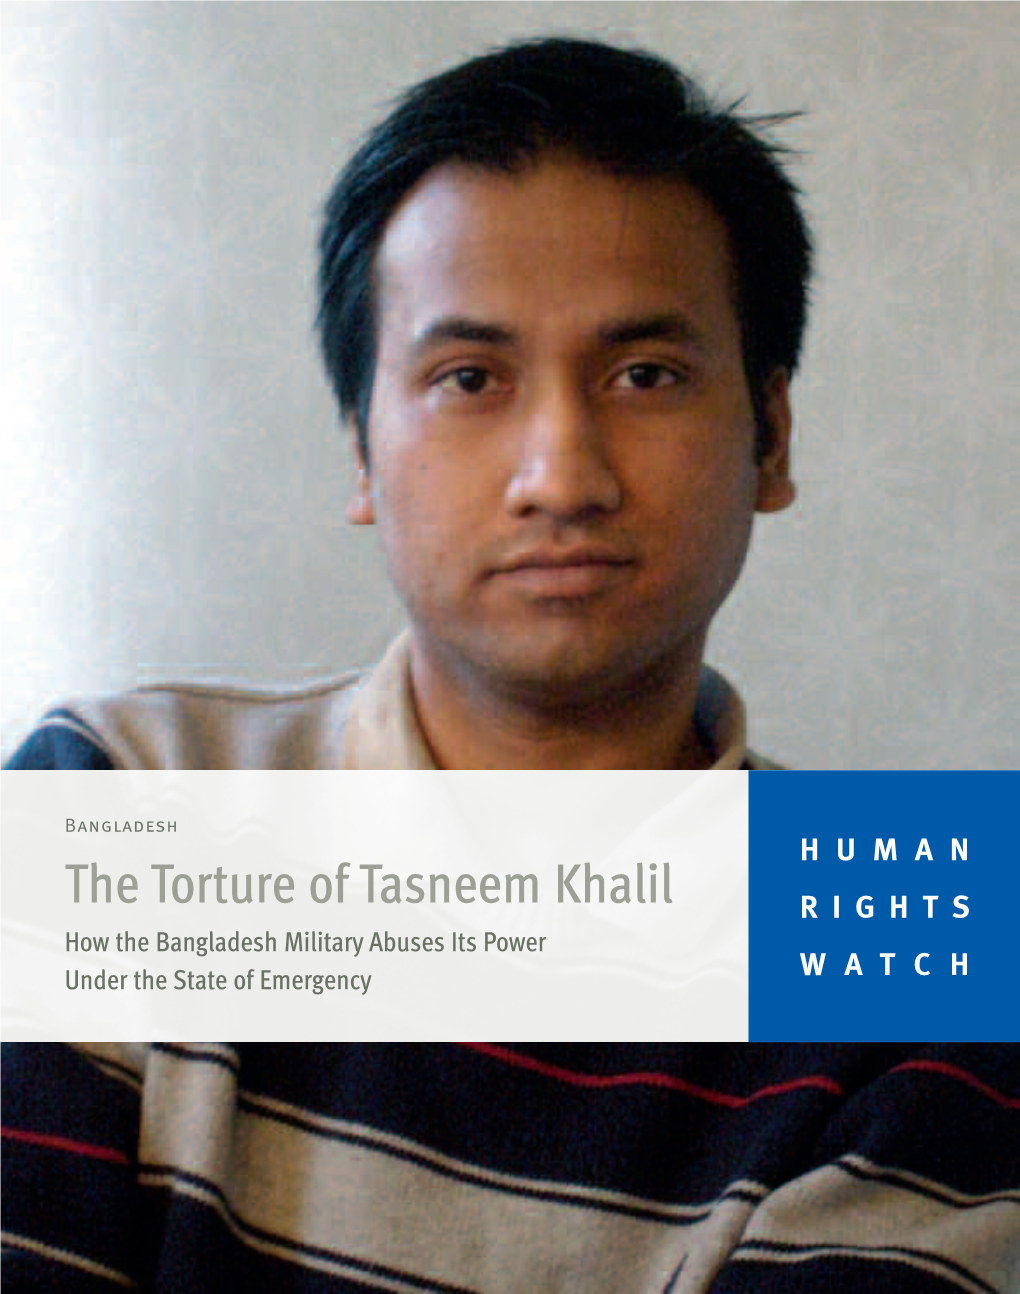 The Torture of Tasneem Khalil RIGHTS How the Bangladesh Military Abuses Its Power Under the State of Emergency WATCH February 2008 Volume 20, No